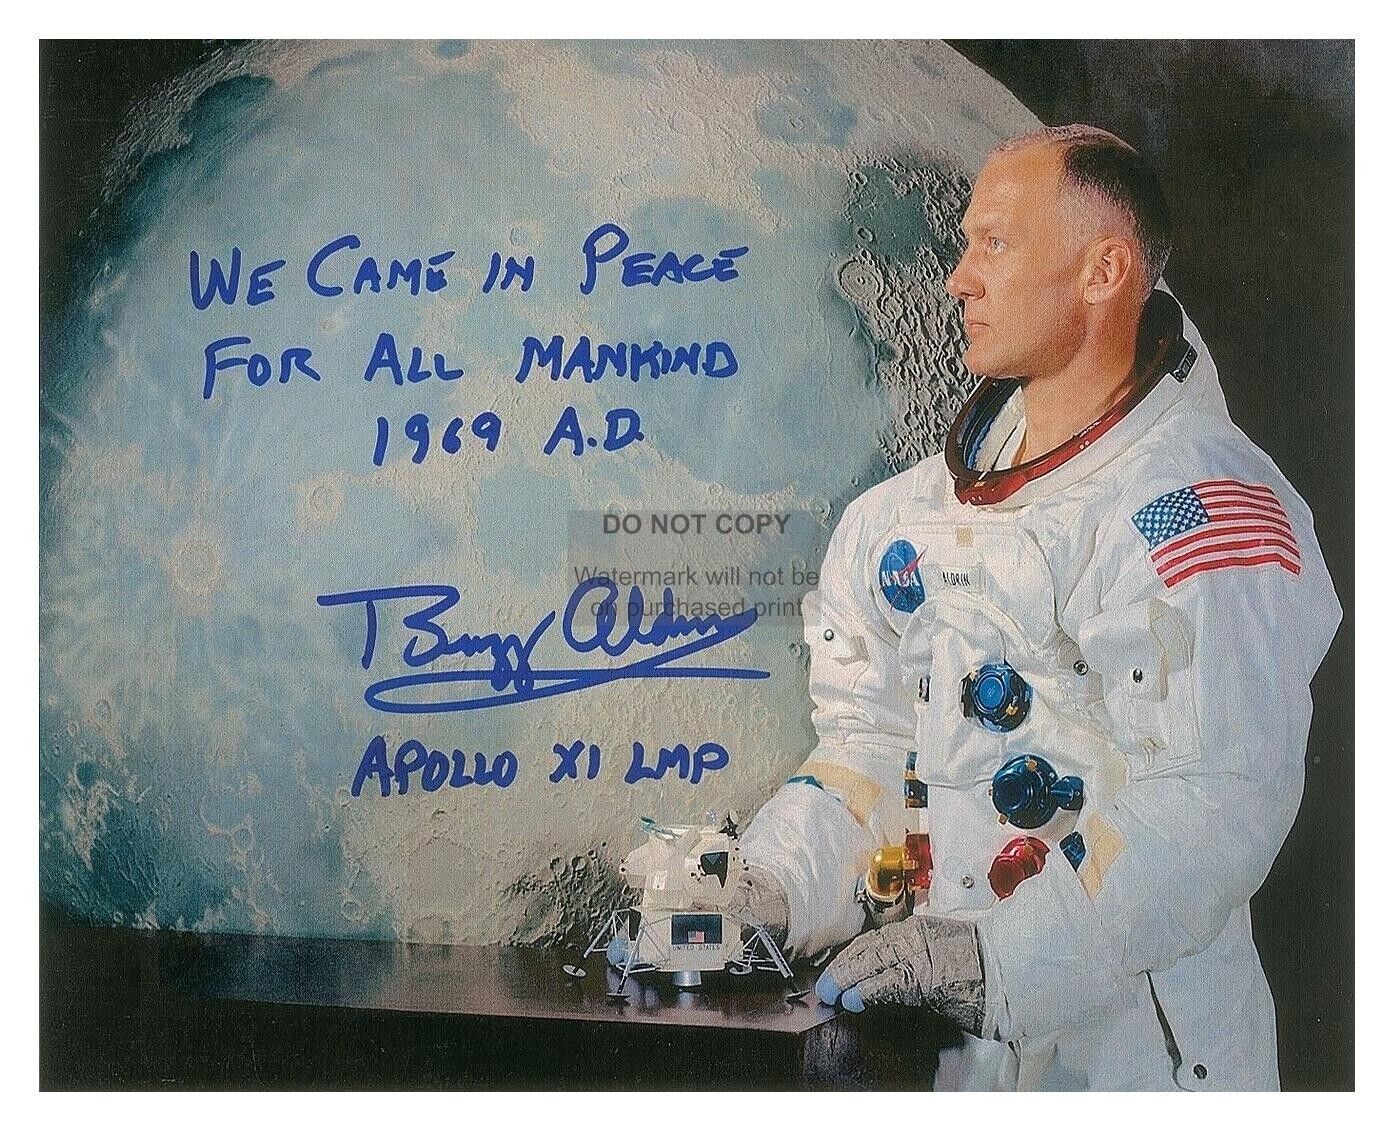 BUZZ ALDRIN WE CAME IN PEACE FOR ALL MANKIND AUTOGRAPHED NASA 8X10 PHOTO REPRINT